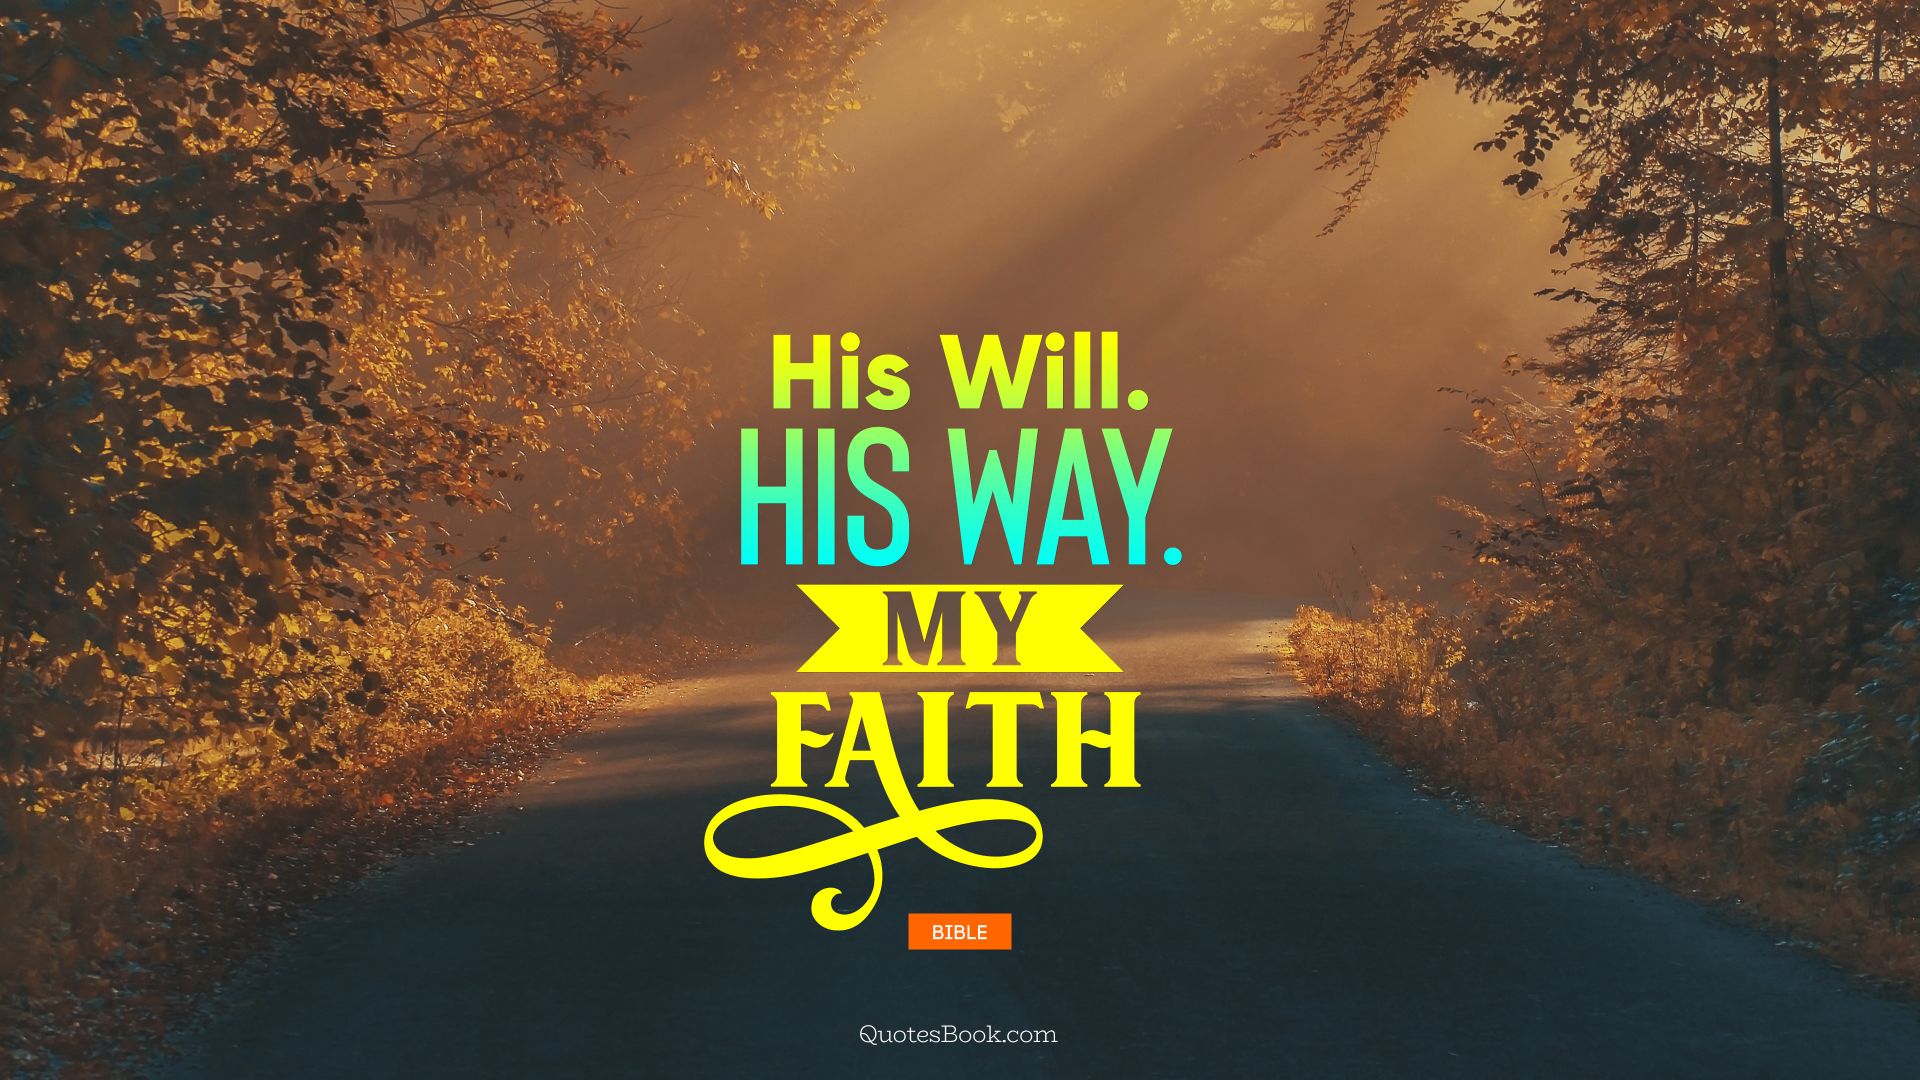 His will. His way. My faith. - Quote by Bible